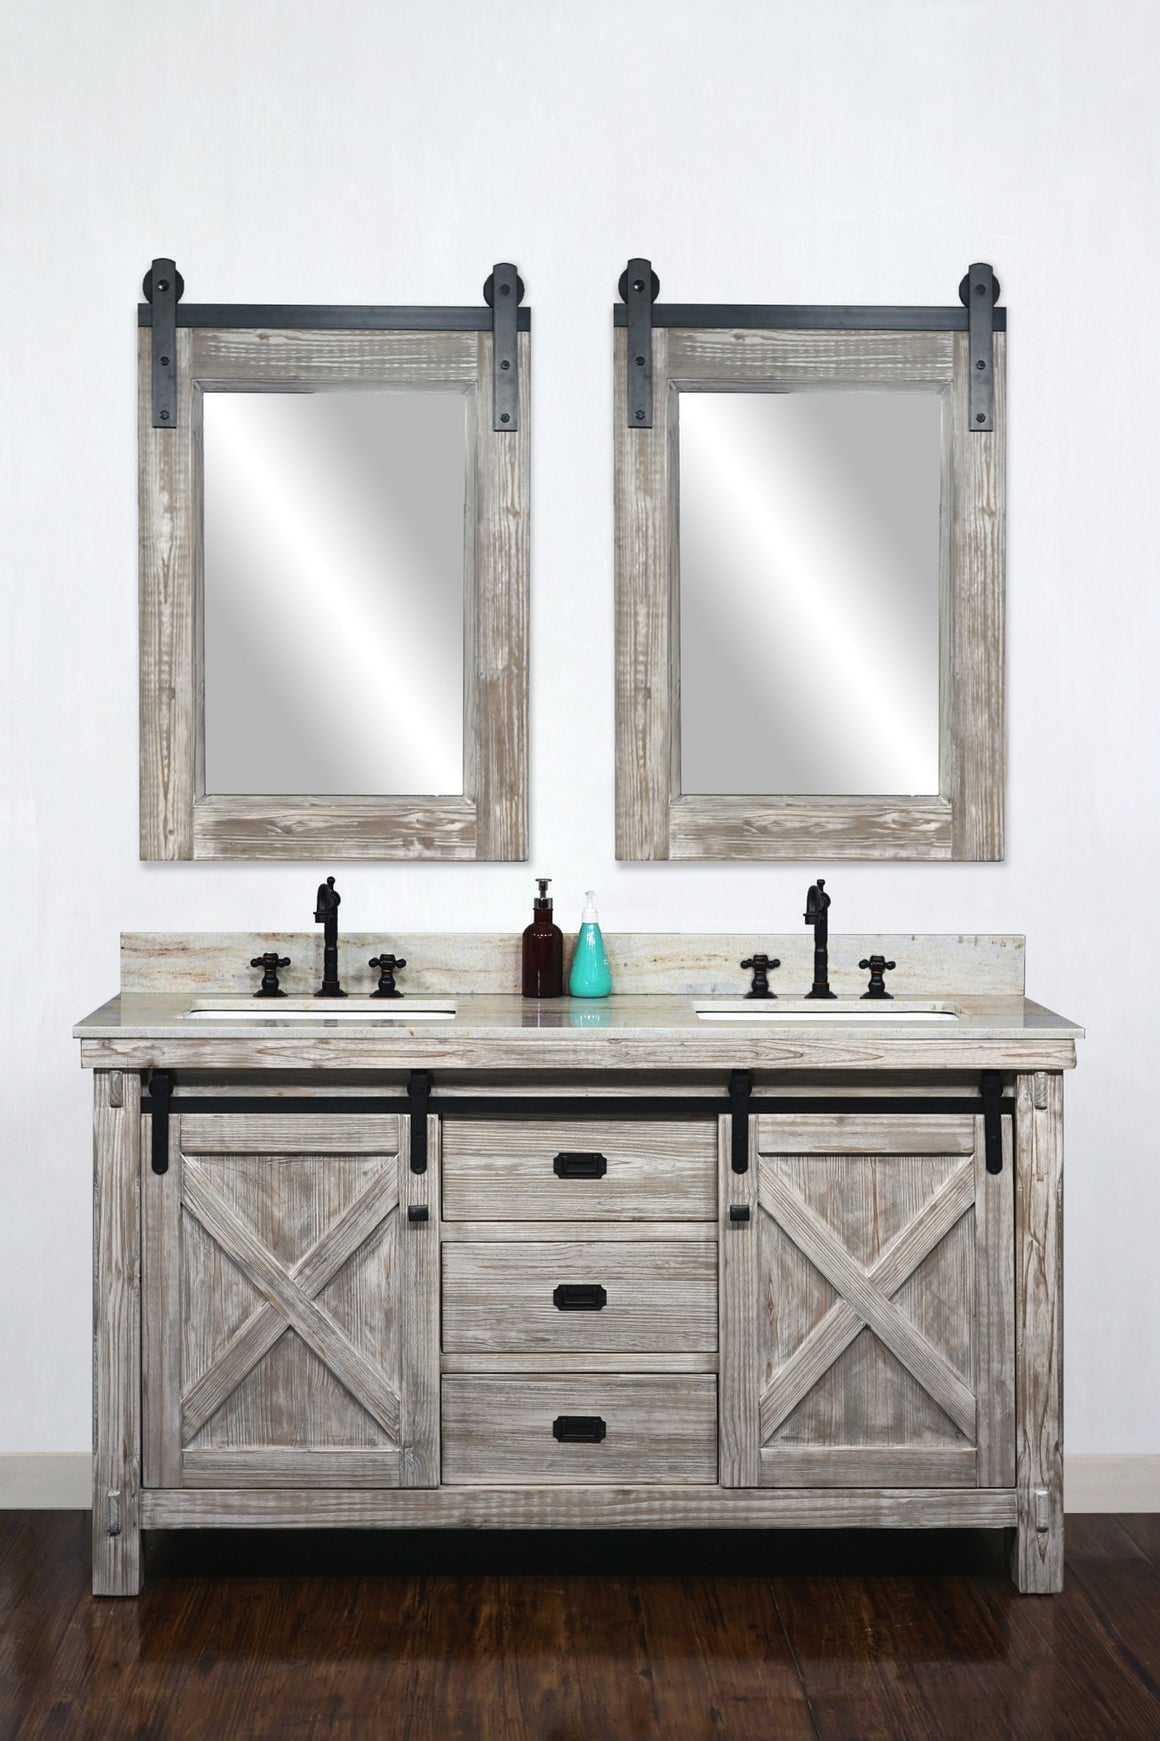 60"RUSTIC SOLID FIR BARN DOOR STYLE DOUBLE SINKS VANITY IN WHITE WASH WITH COASTAL SANDS MARBLE TOP WITH RECTANGULAR SINK-NO FAUCET